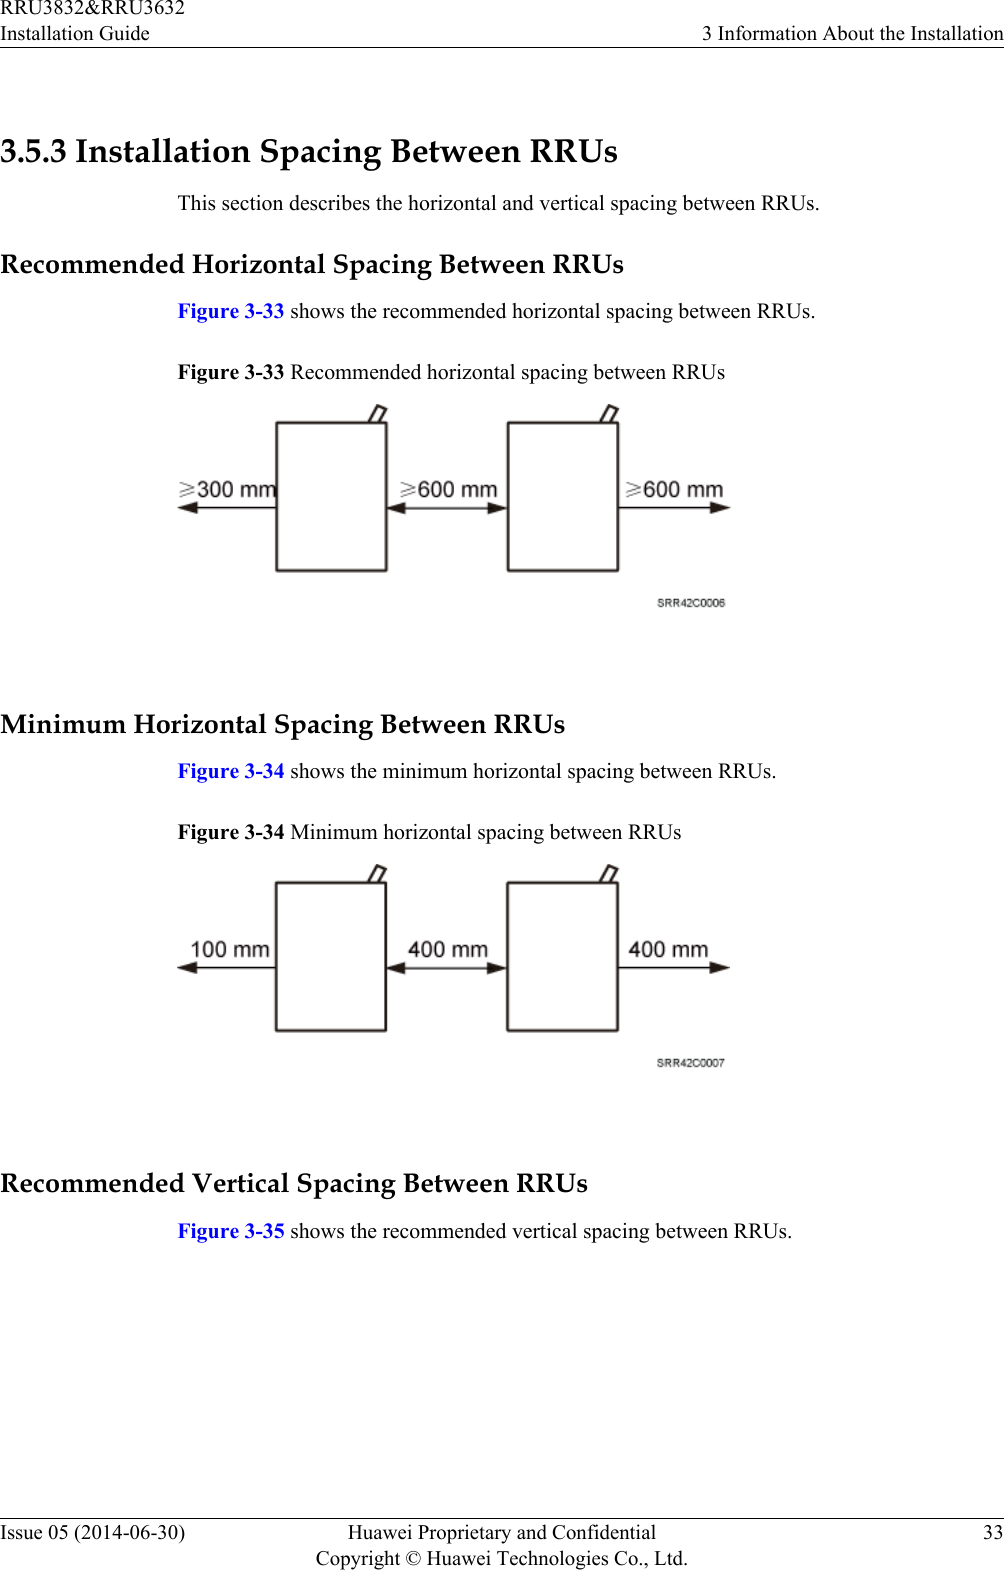  3.5.3 Installation Spacing Between RRUsThis section describes the horizontal and vertical spacing between RRUs.Recommended Horizontal Spacing Between RRUsFigure 3-33 shows the recommended horizontal spacing between RRUs.Figure 3-33 Recommended horizontal spacing between RRUs Minimum Horizontal Spacing Between RRUsFigure 3-34 shows the minimum horizontal spacing between RRUs.Figure 3-34 Minimum horizontal spacing between RRUs Recommended Vertical Spacing Between RRUsFigure 3-35 shows the recommended vertical spacing between RRUs.RRU3832&amp;RRU3632Installation Guide 3 Information About the InstallationIssue 05 (2014-06-30) Huawei Proprietary and ConfidentialCopyright © Huawei Technologies Co., Ltd.33